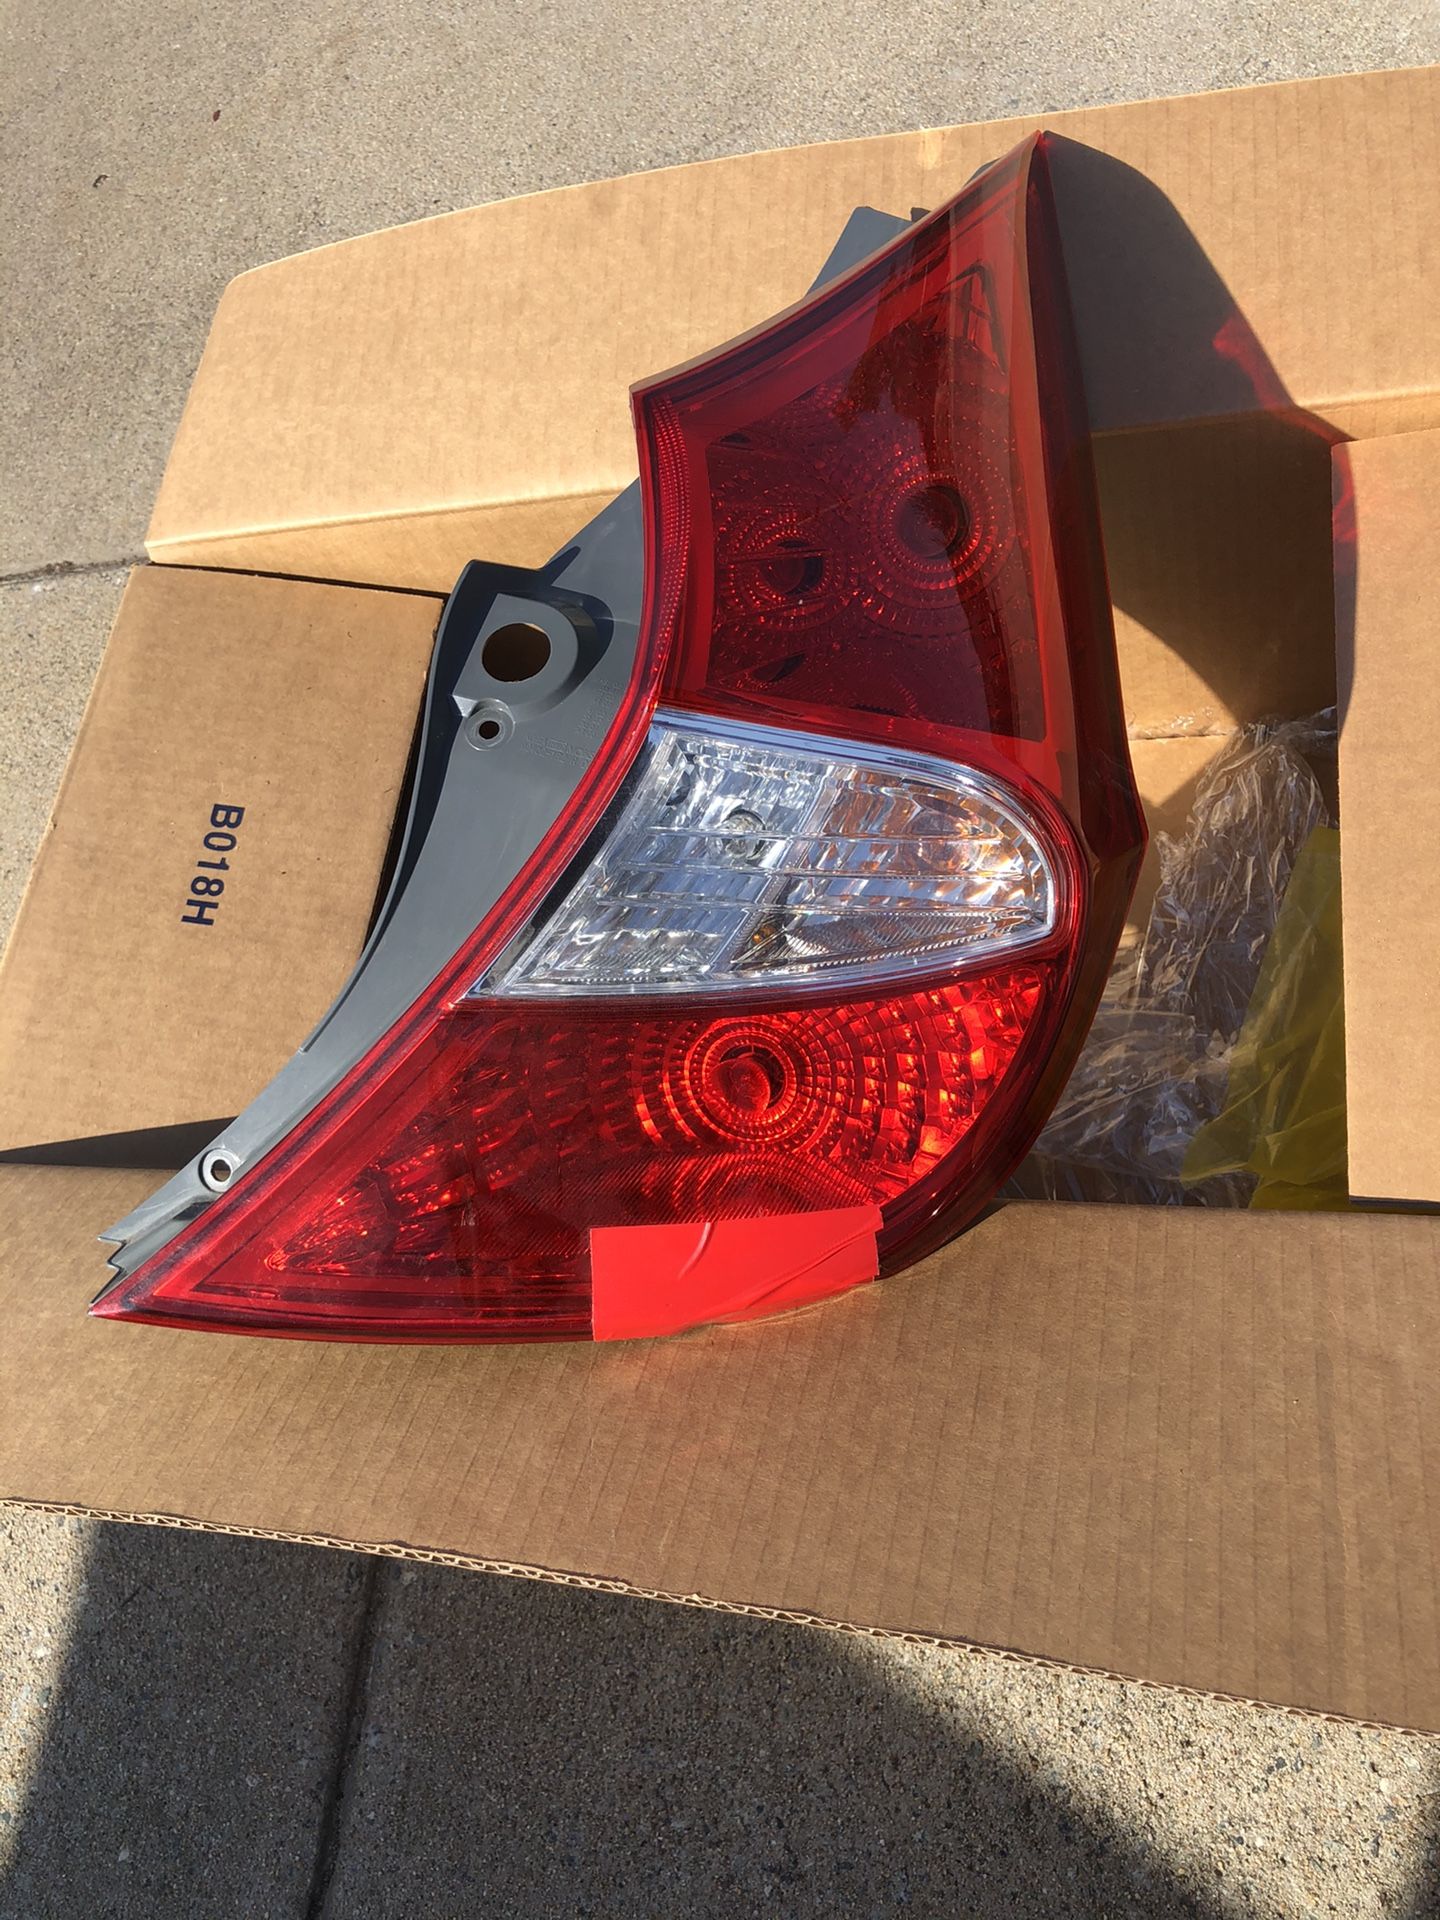 2015 Hyundai Accent Right Tail Light (fits 2012-2017 I believe)